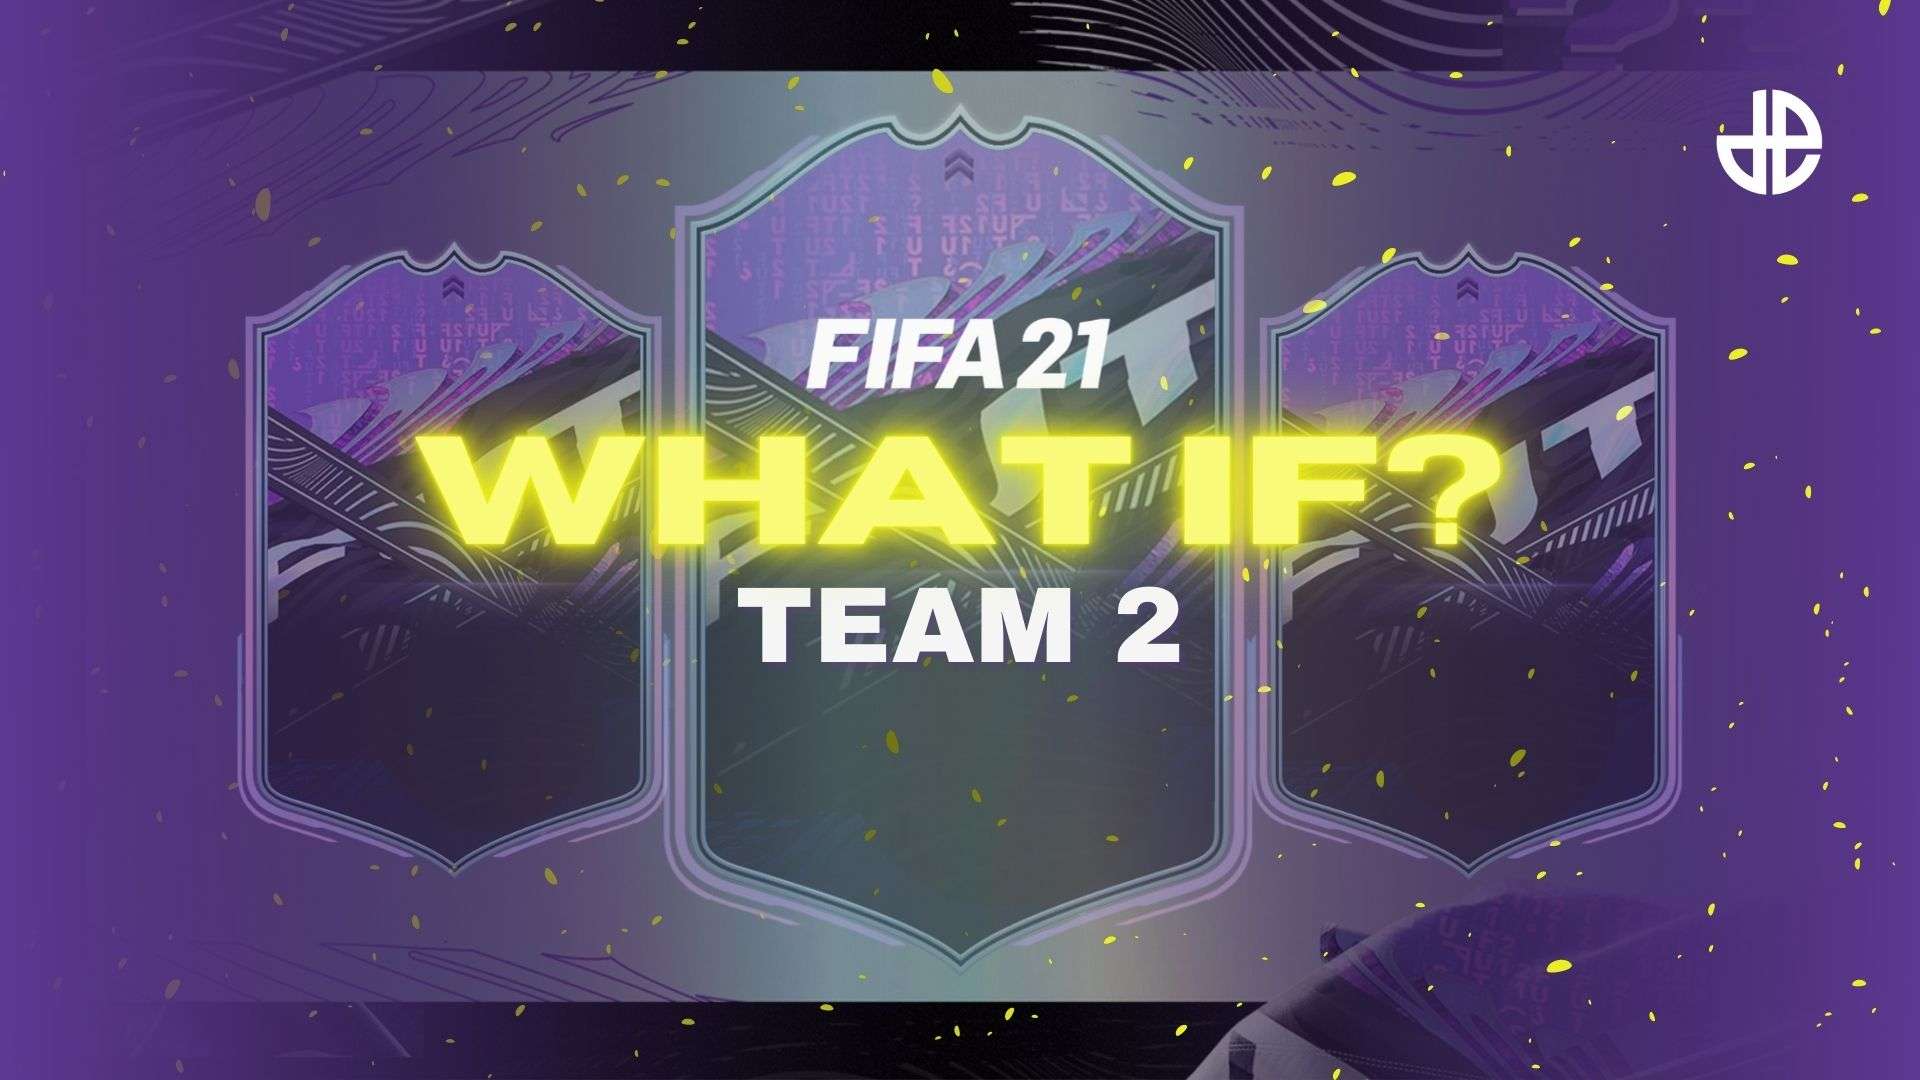 FIFA 21 What If Team 2 revealed